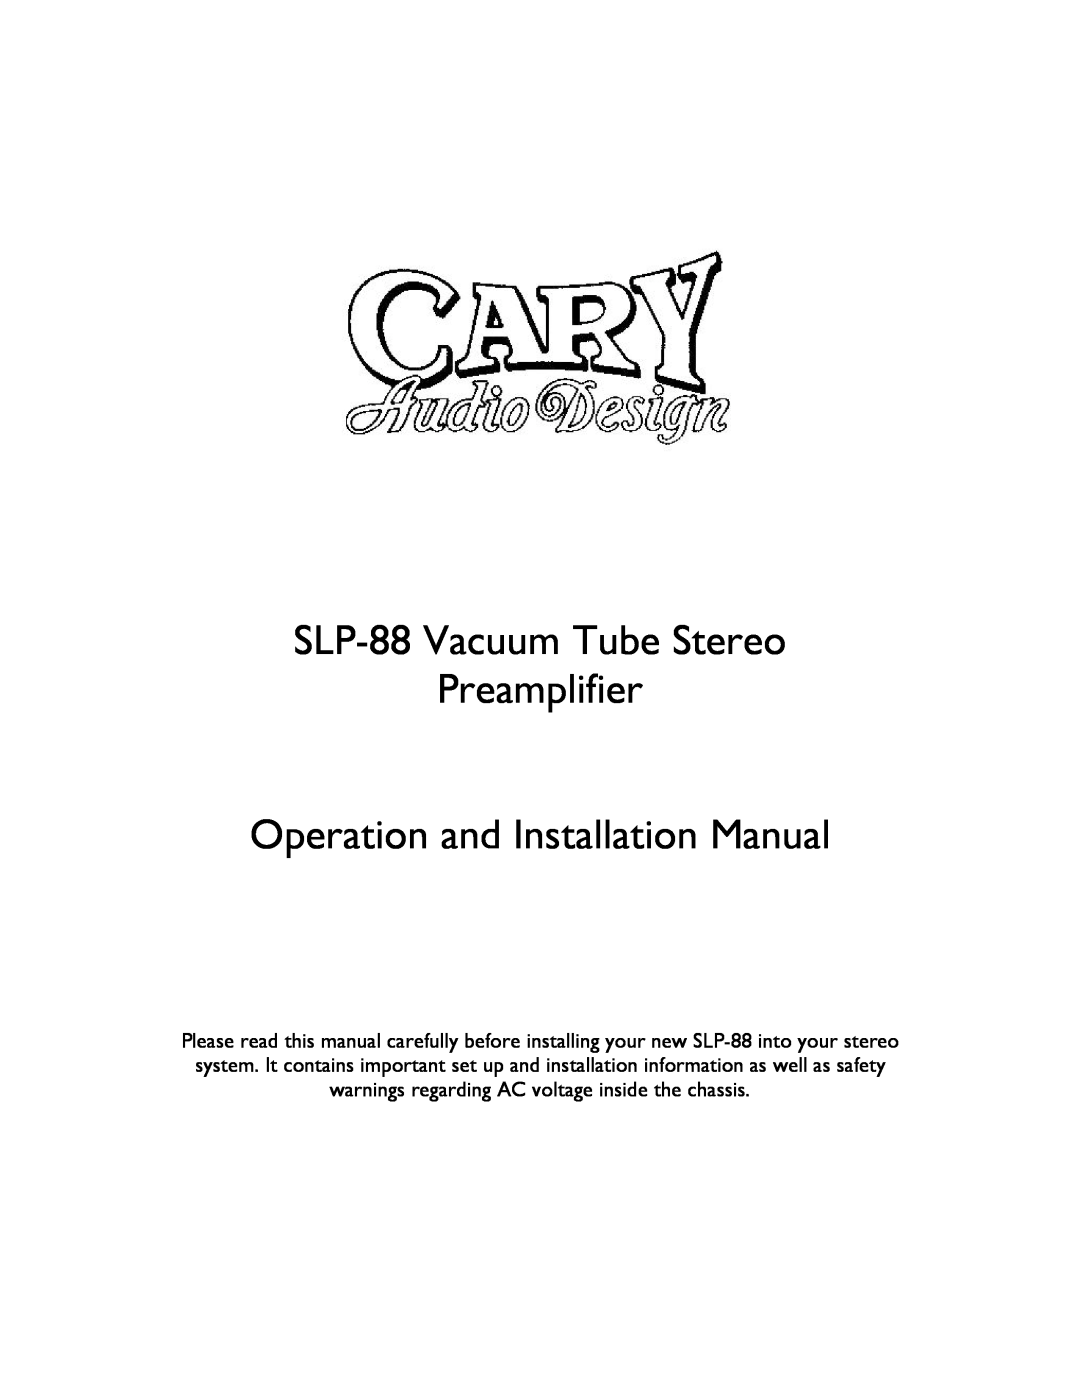 Cary Audio Design installation manual SLP-88Vacuum Tube Stereo Preamplifier, Operation and Installation Manual 